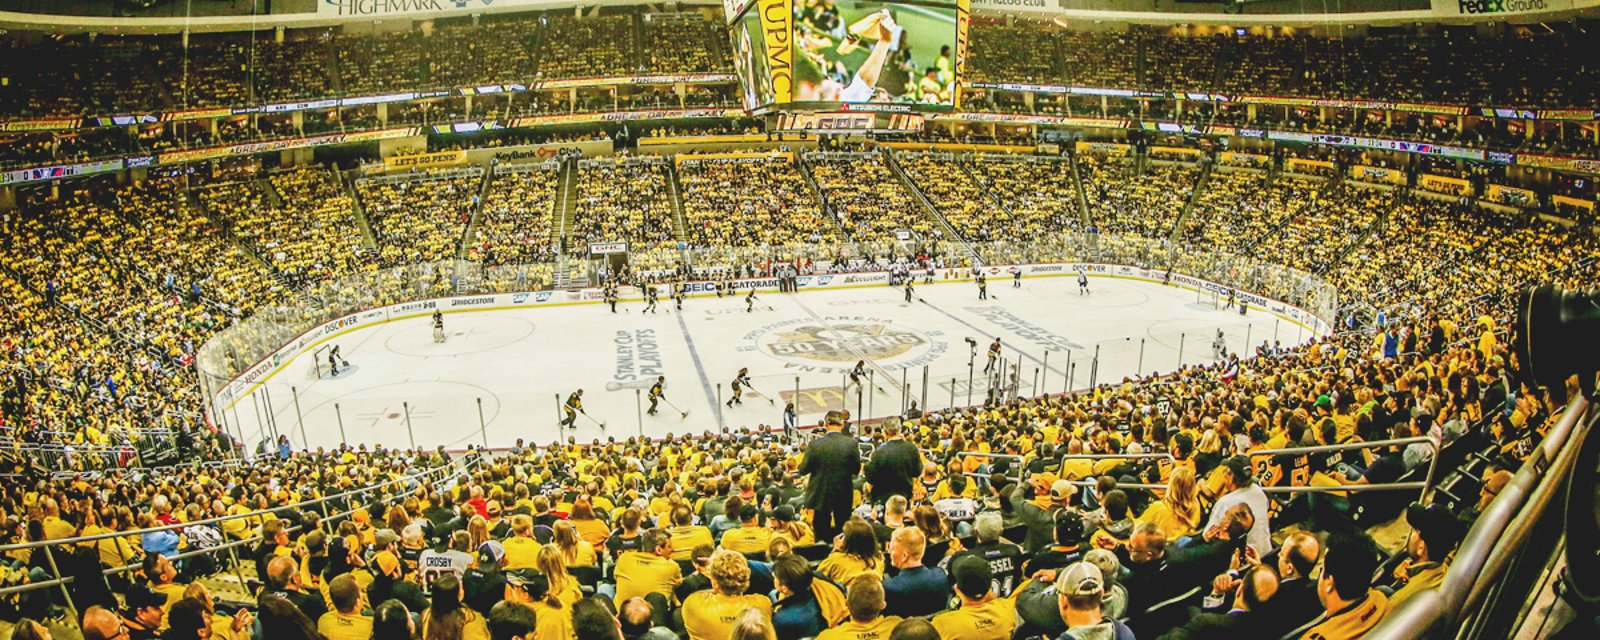 The Washington Capitals organization PUBLICLY MOCKED the Penguins’ fans in game 6.